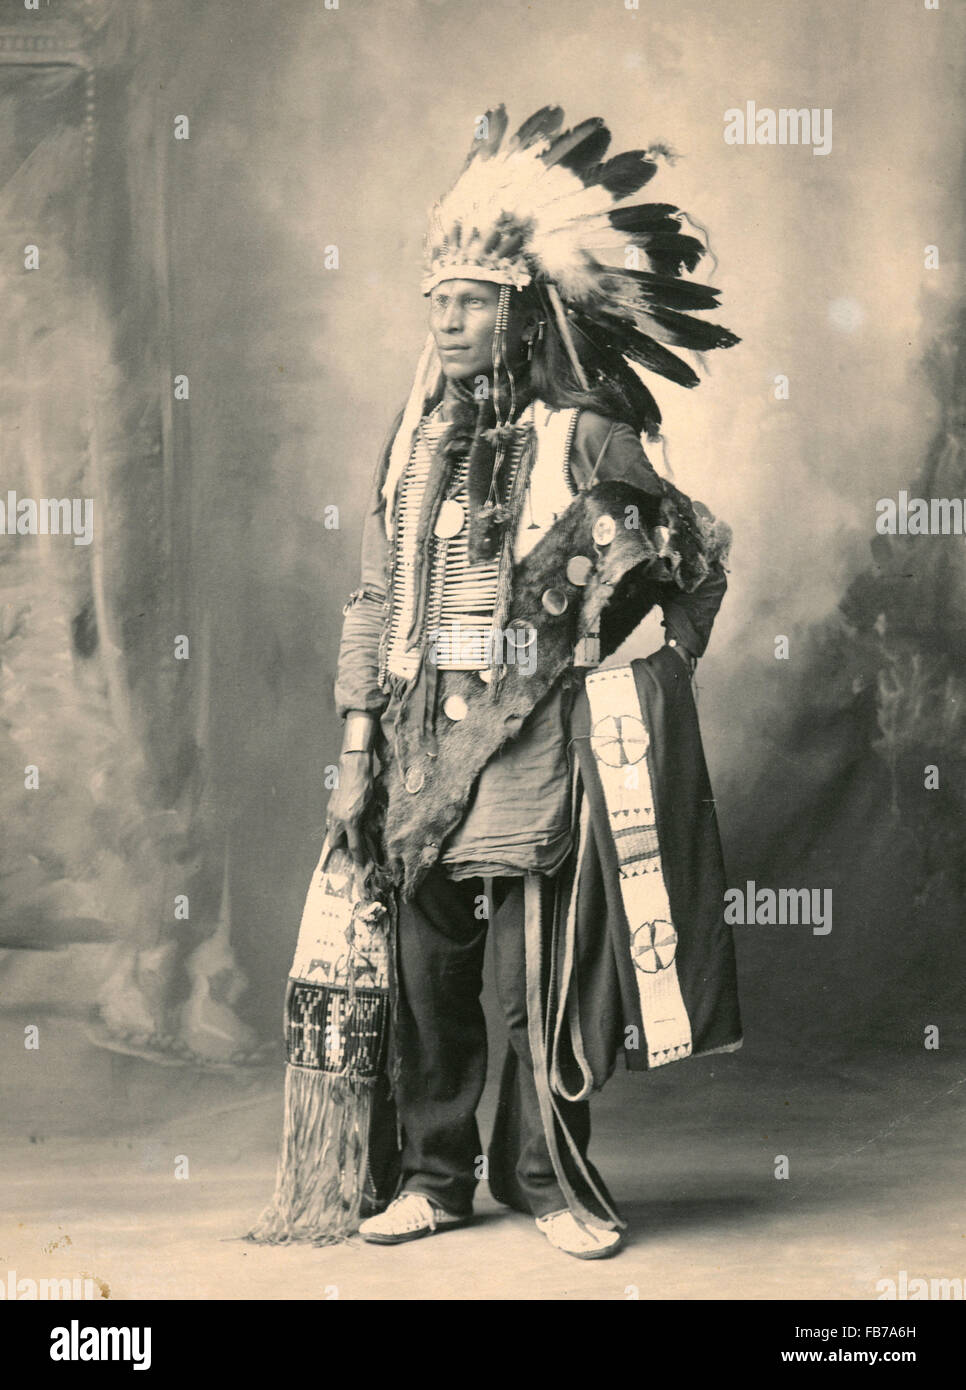 Native American Indian, Spotted Horse, Sioux Indianer Stockfoto